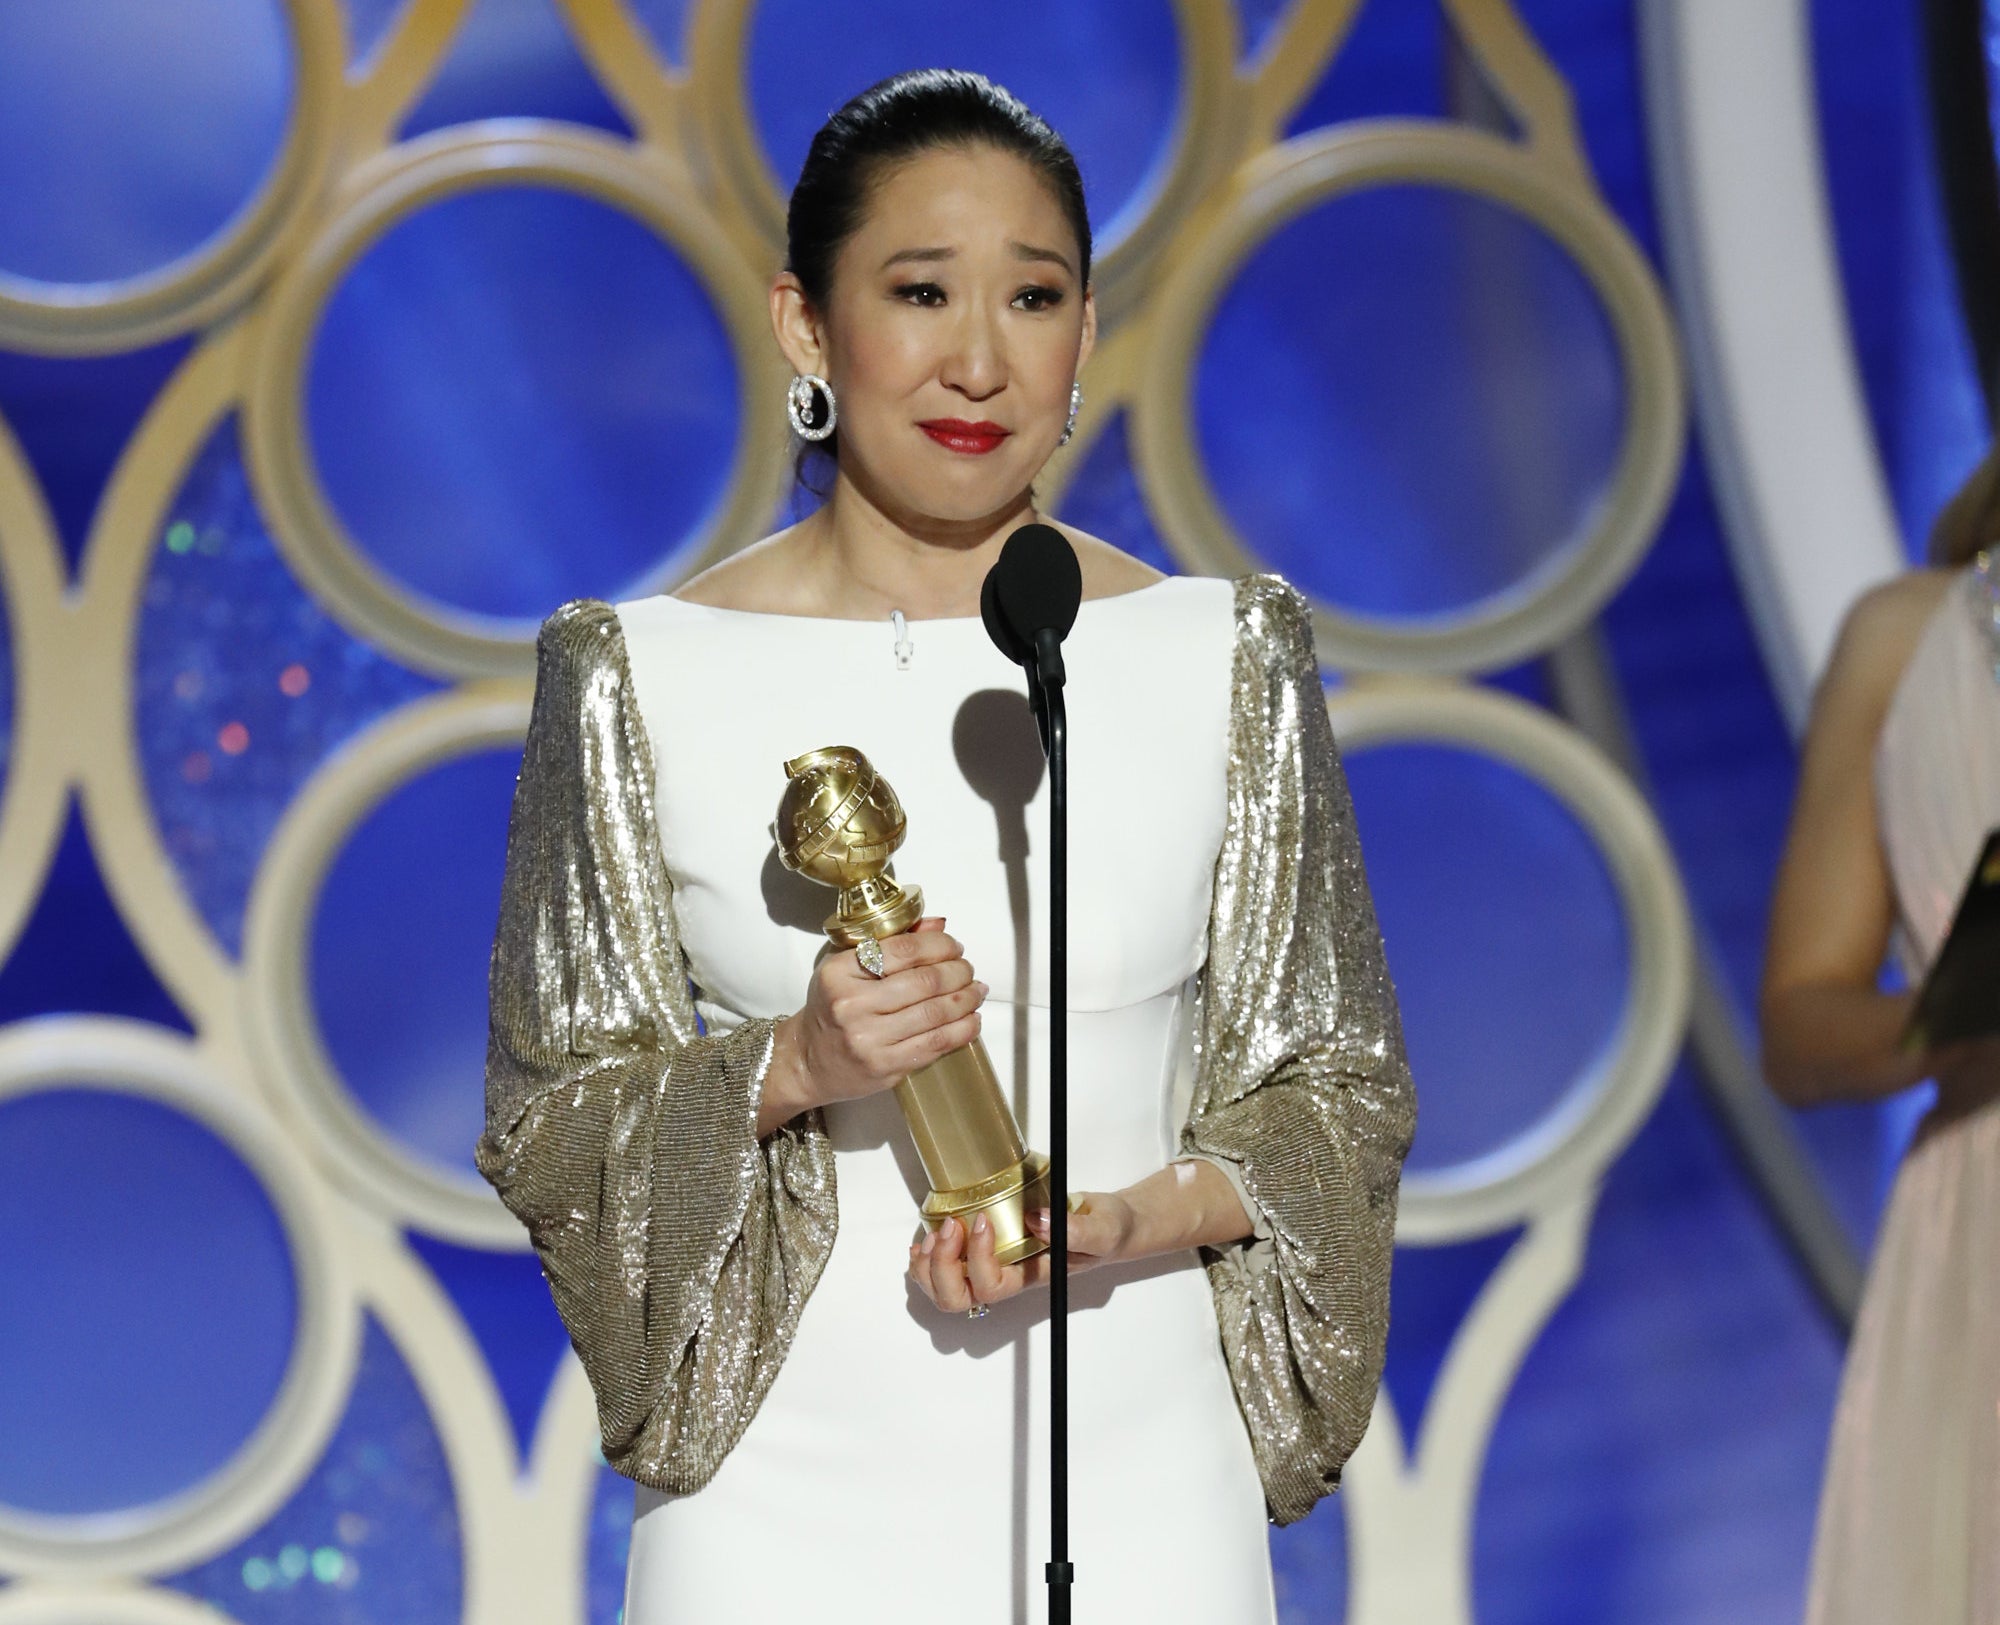 Sandra Oh on stage accepting her Golden Globe Award for Best Actress in a Drama Series for &quot;Killing Eve&quot;